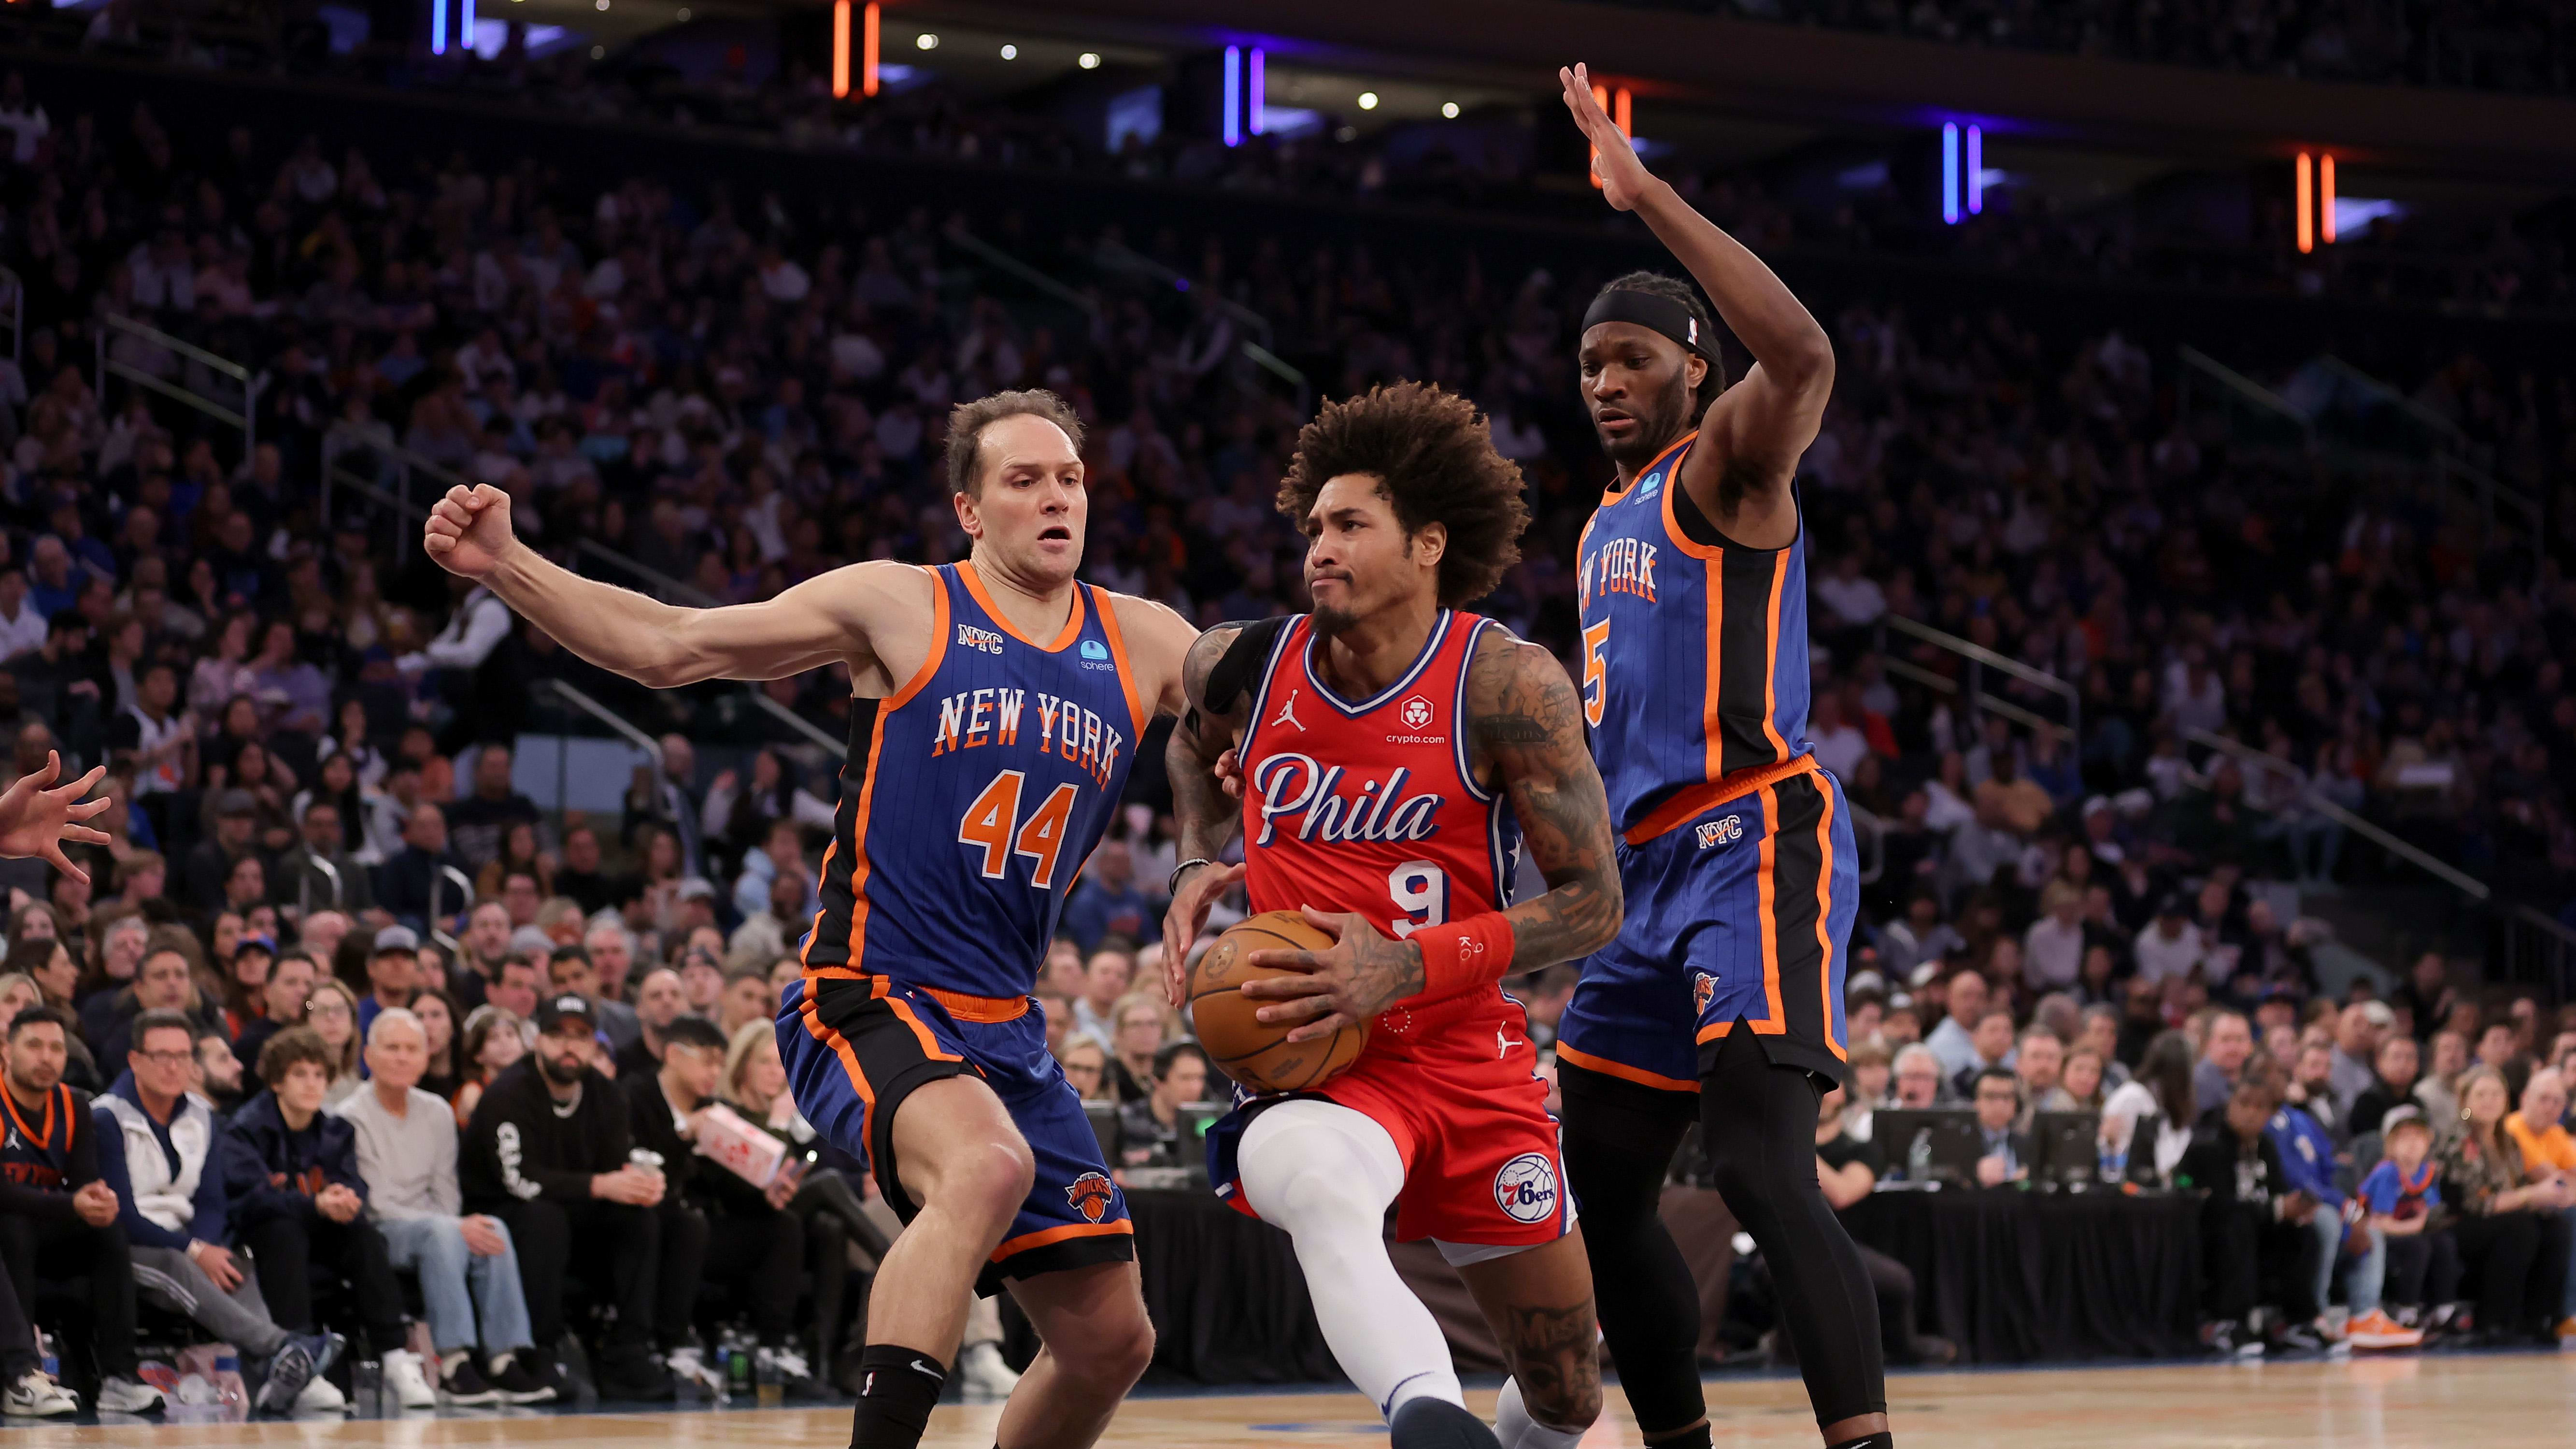 Knicks Rule Out Key Contributor for Game 5 vs. Sixers